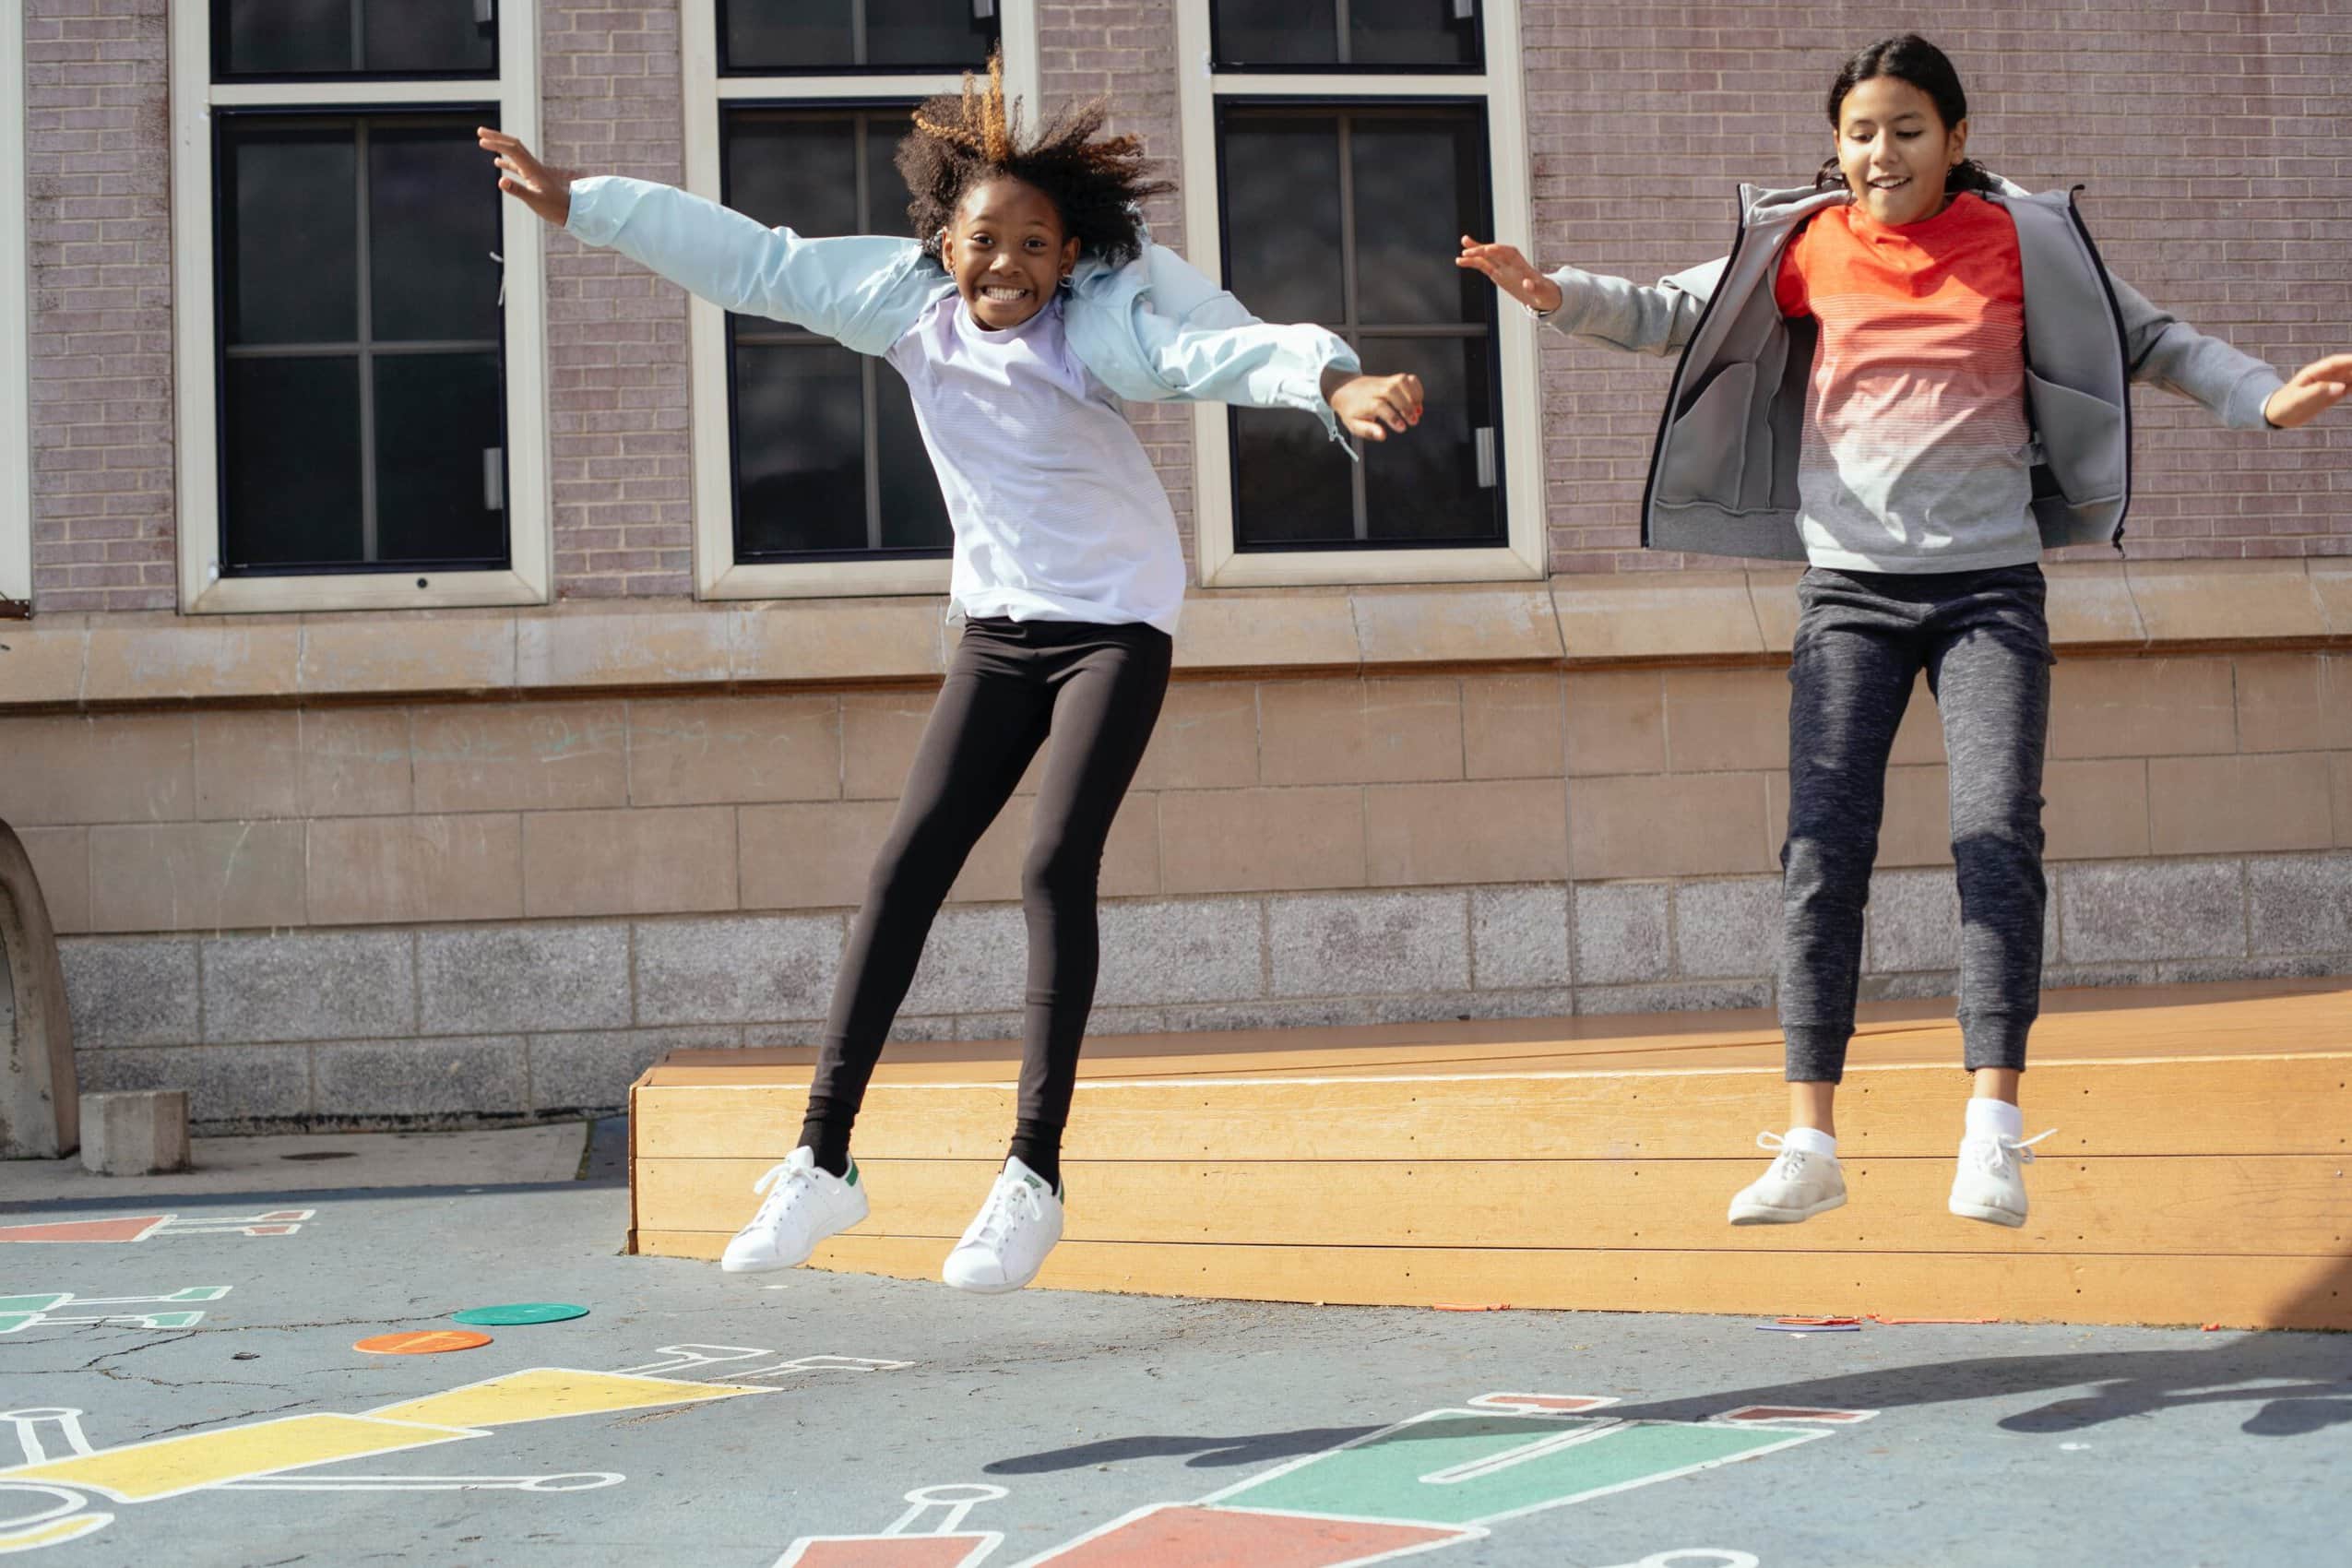 Photo by Mary Taylor: https://www.pexels.com/photo/excited-multiethnic-classmates-jumping-off-wooden-scene-located-near-school-5896812/